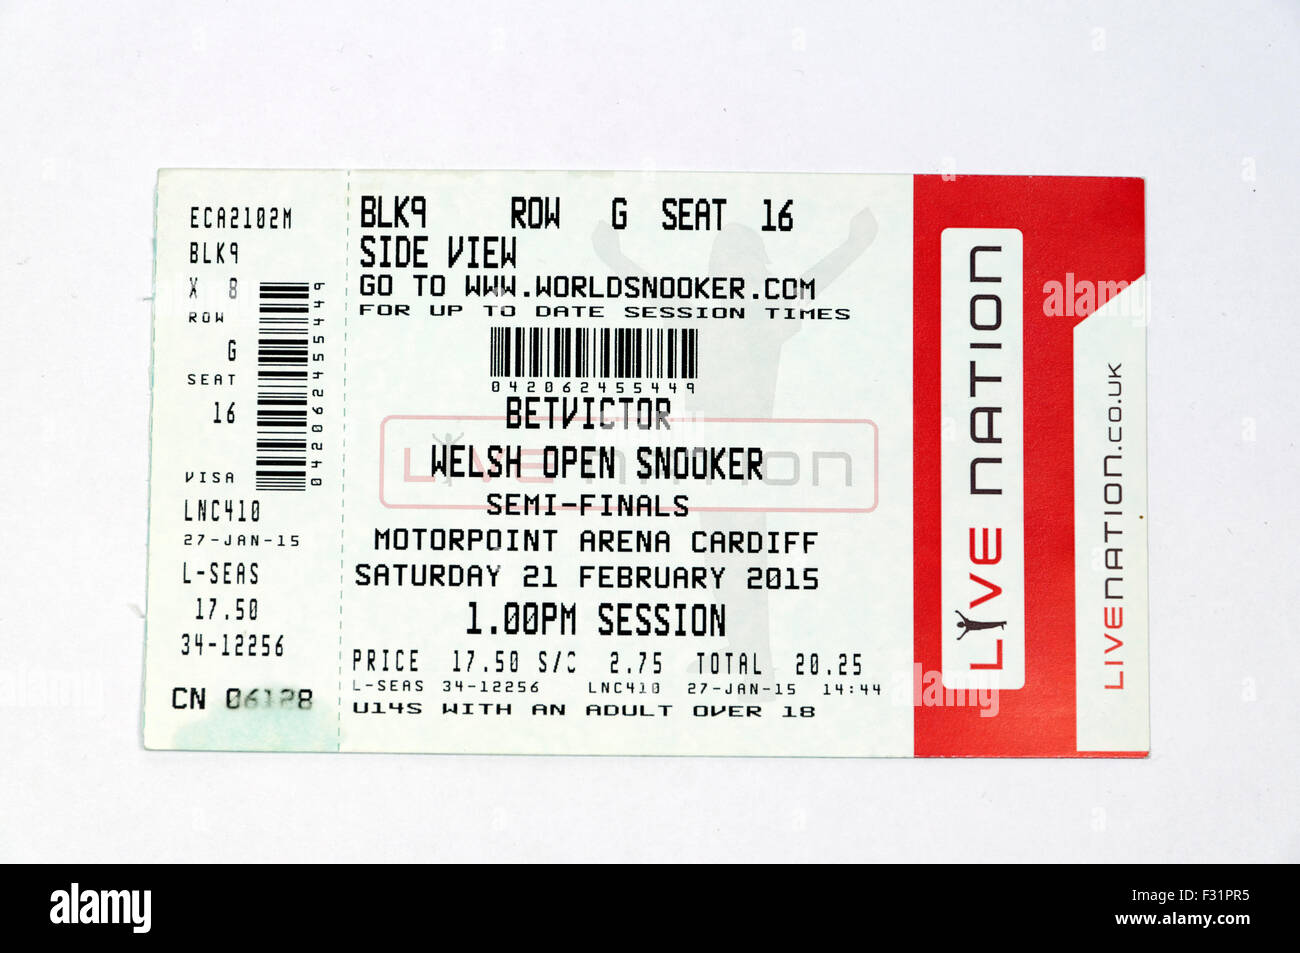 Tickets ab Bet Fred Welsh Open Snooker Wettbewerb, Hallam FM Arena, Cardiff. Stockfoto